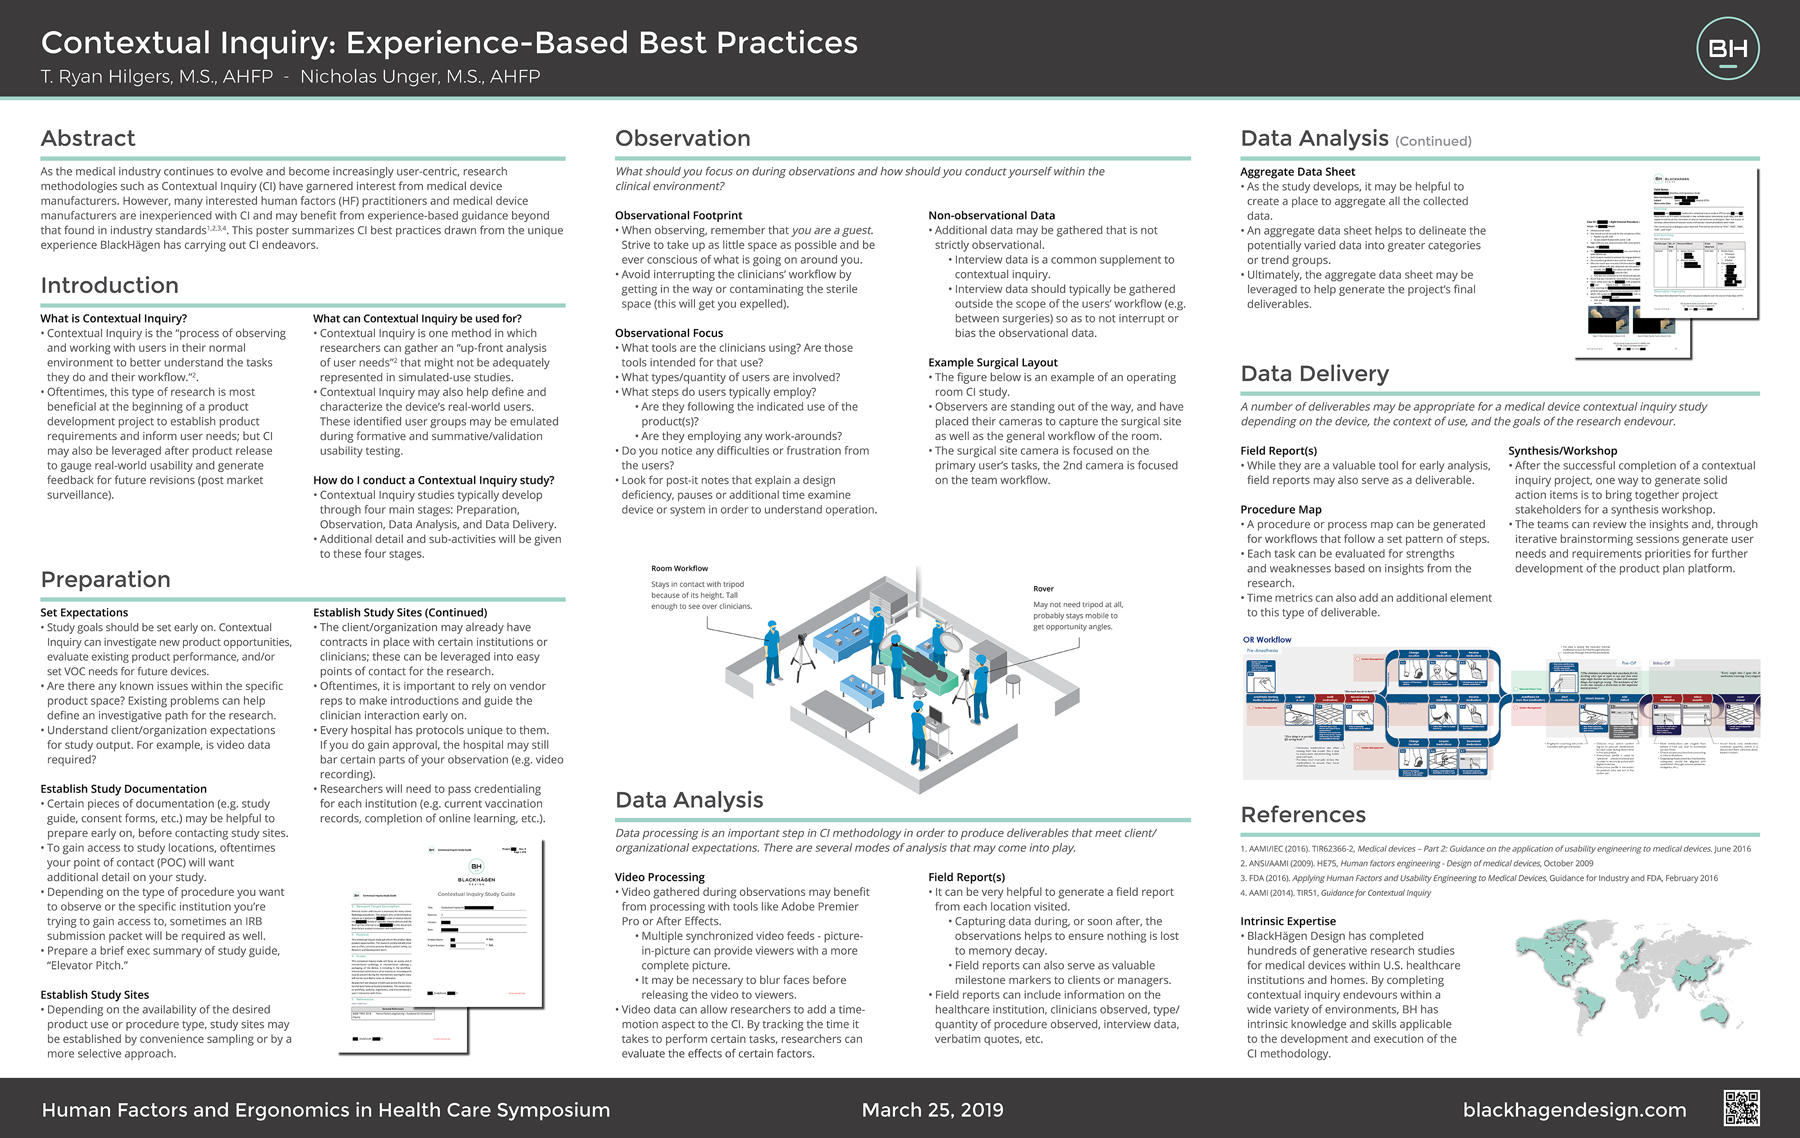 Ryan Hilgers and Nick Unger Contextual Inquiry: Experience-Based Best Practices Poster